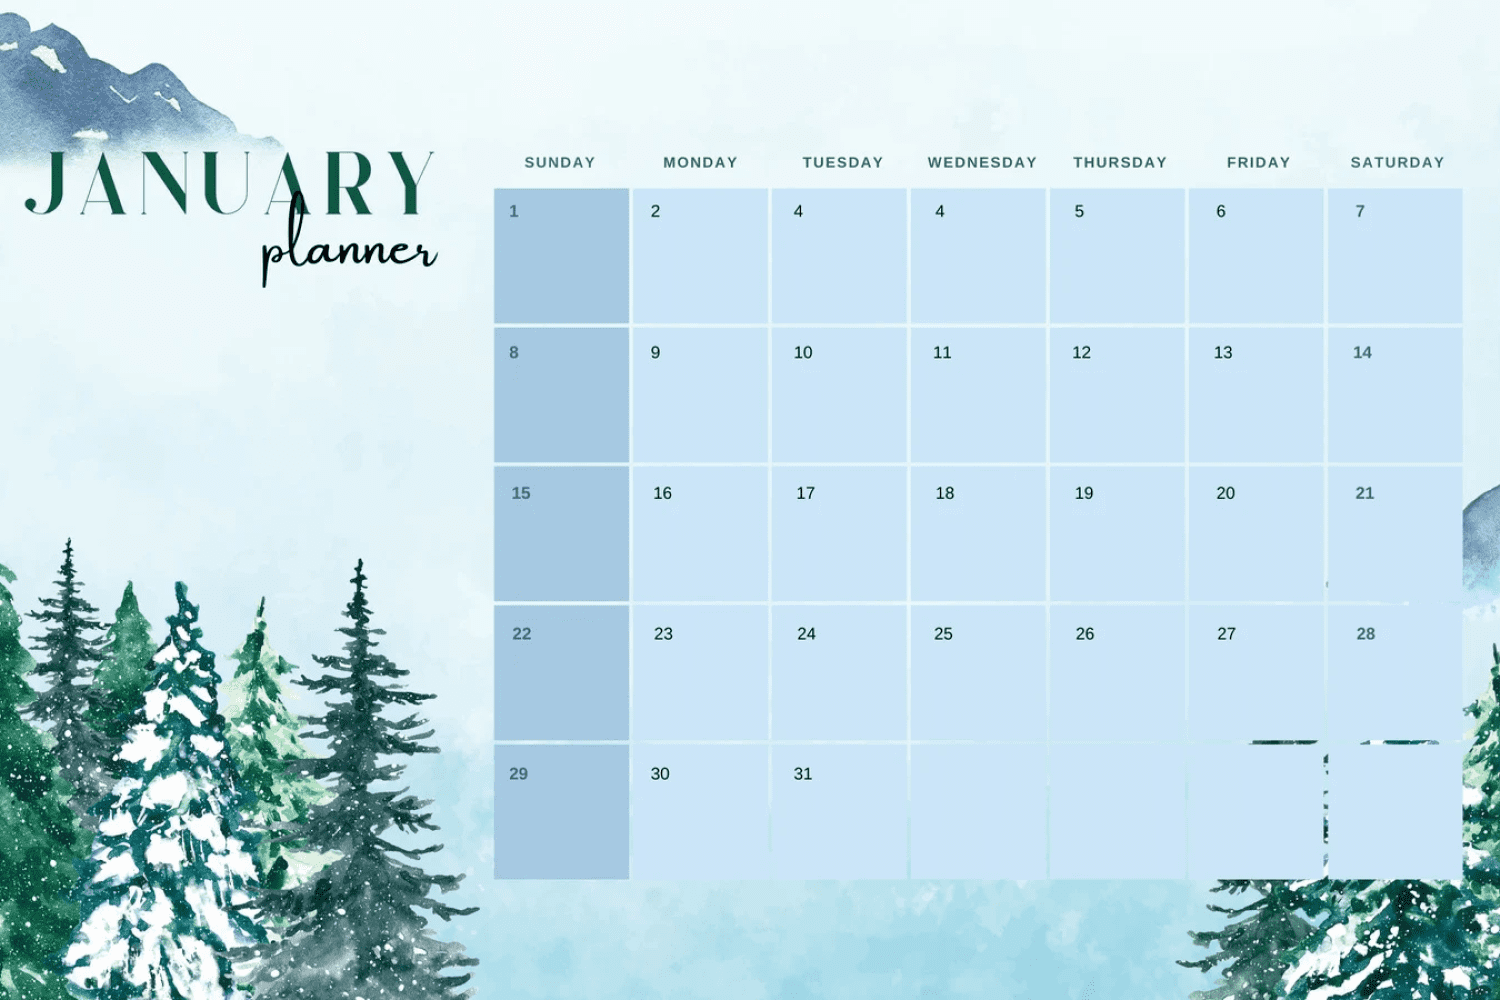 January calendar with painted snowy fir trees and mountains in the background.